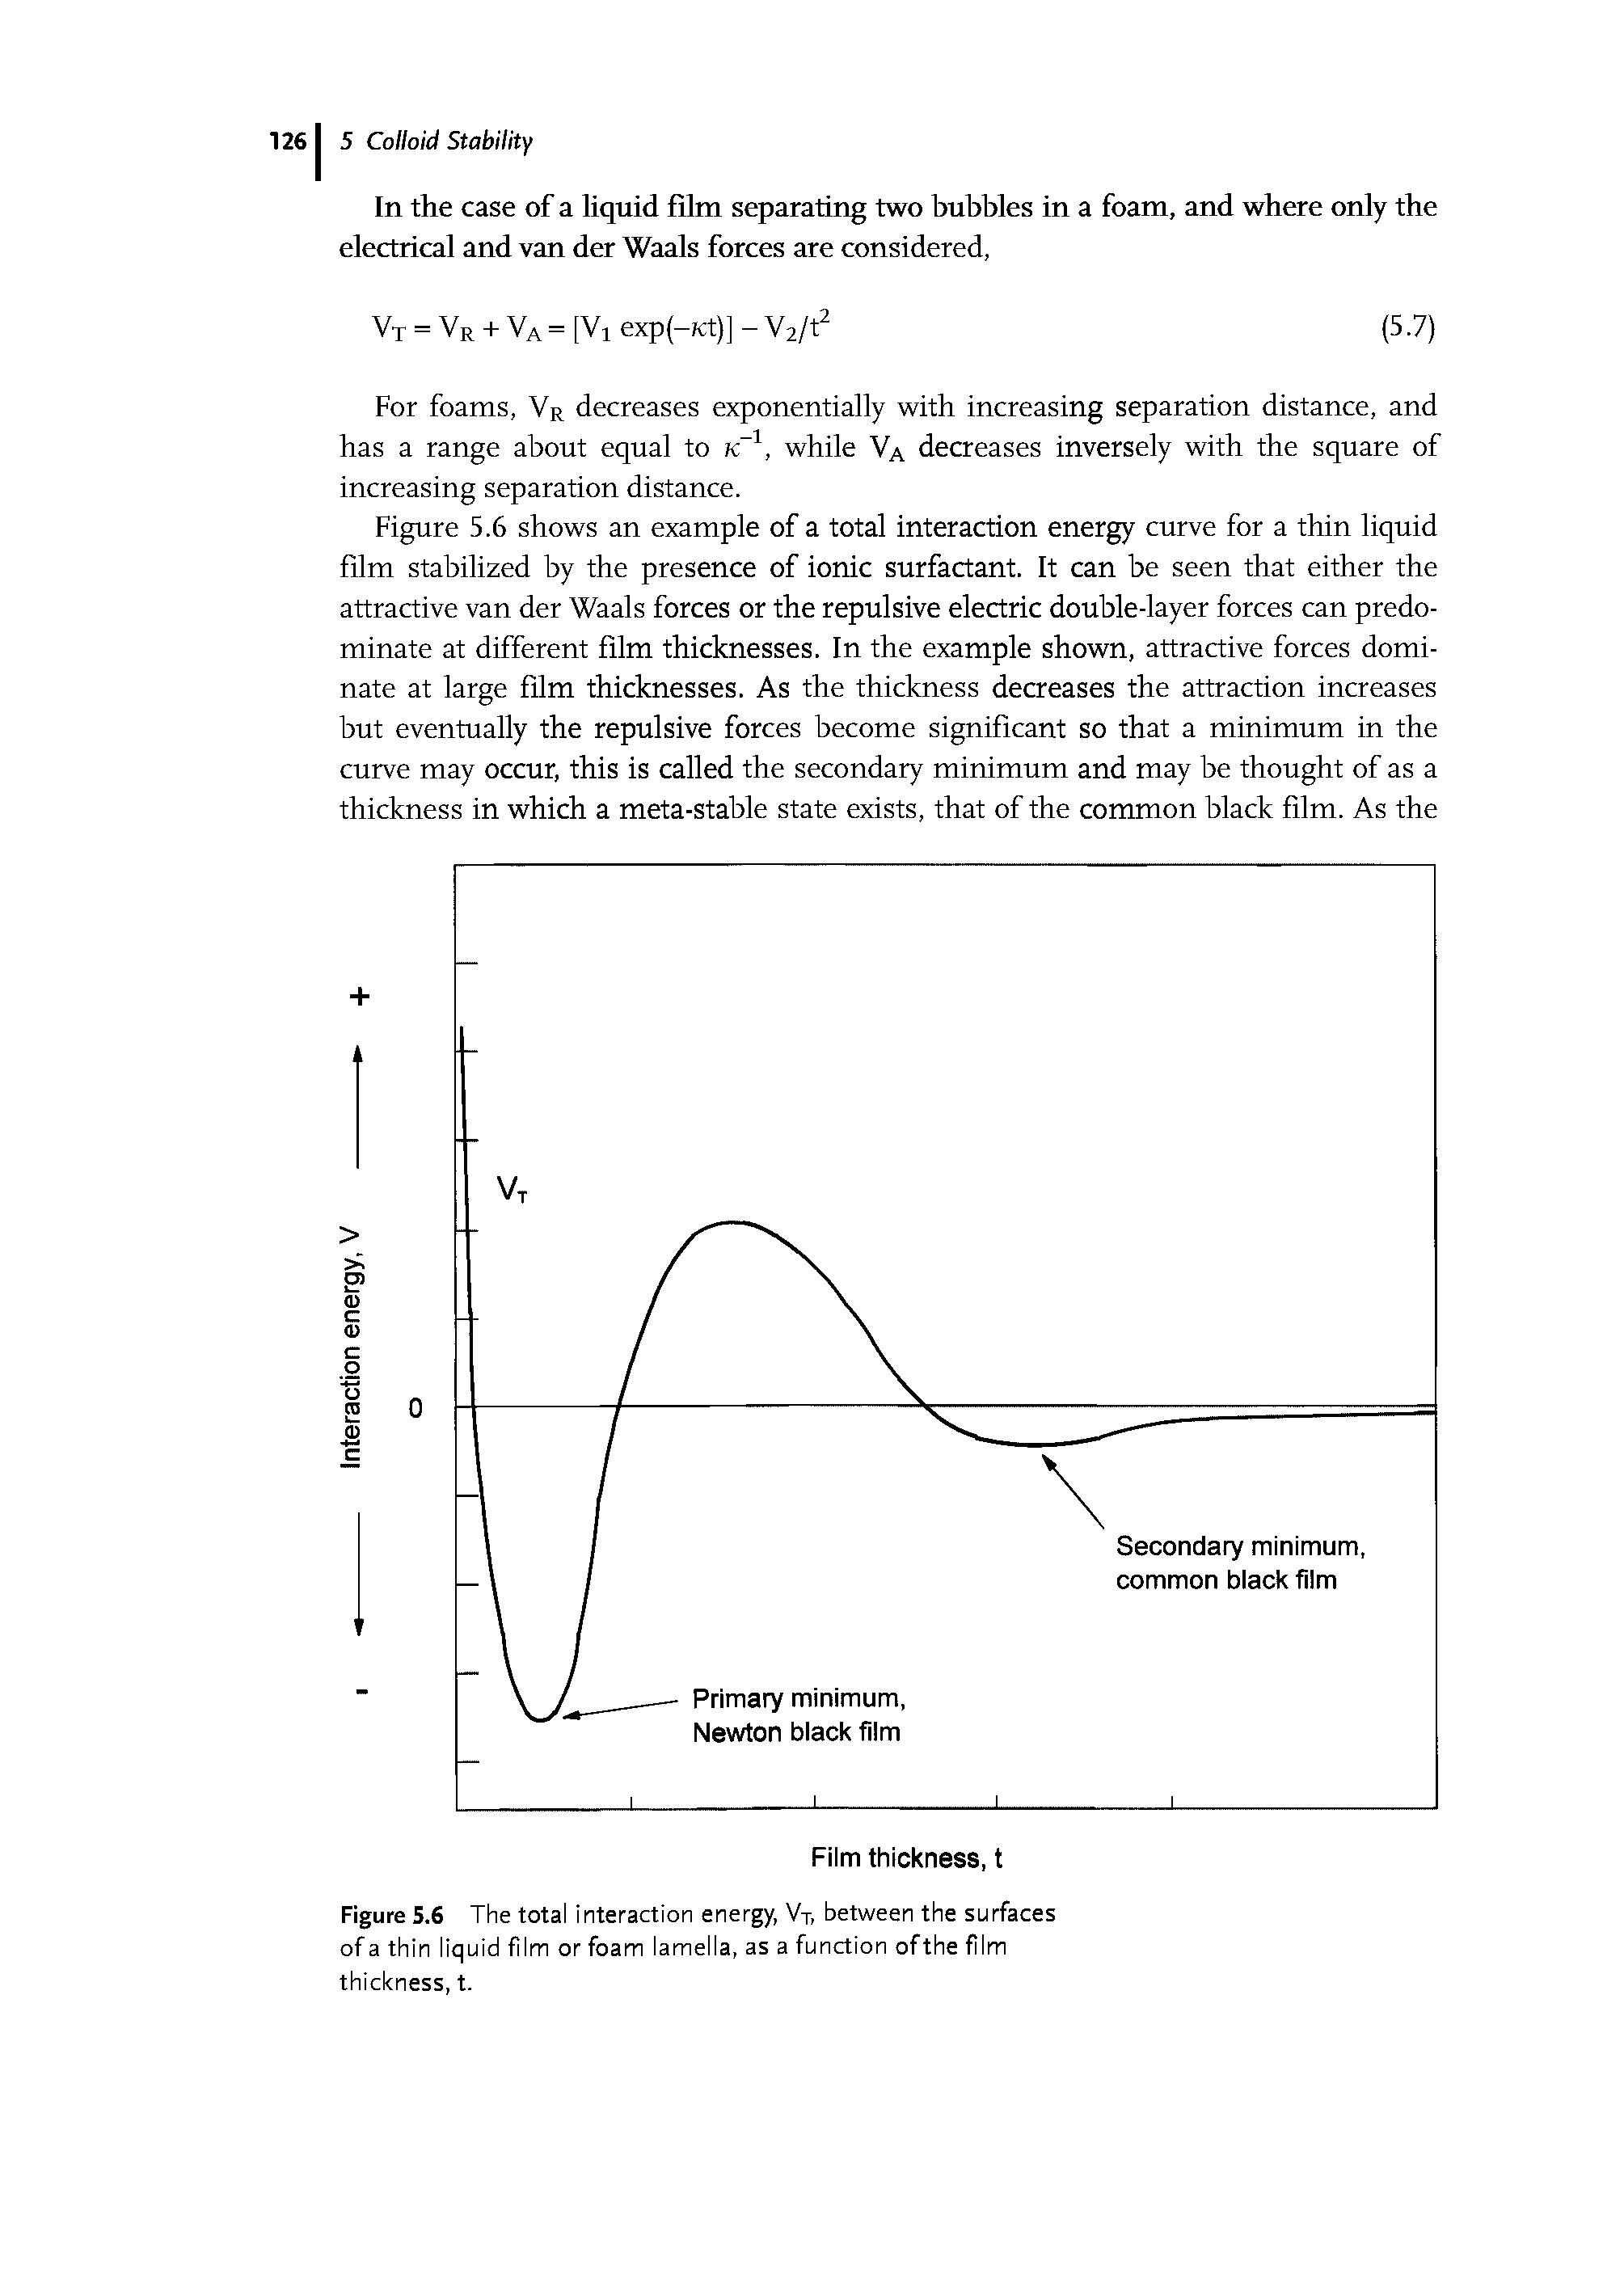 Figure S.6 The total interaction energy, VT, between the surfaces of a thin liquid film or foam lamella, as a function ofthe film thickness, t.